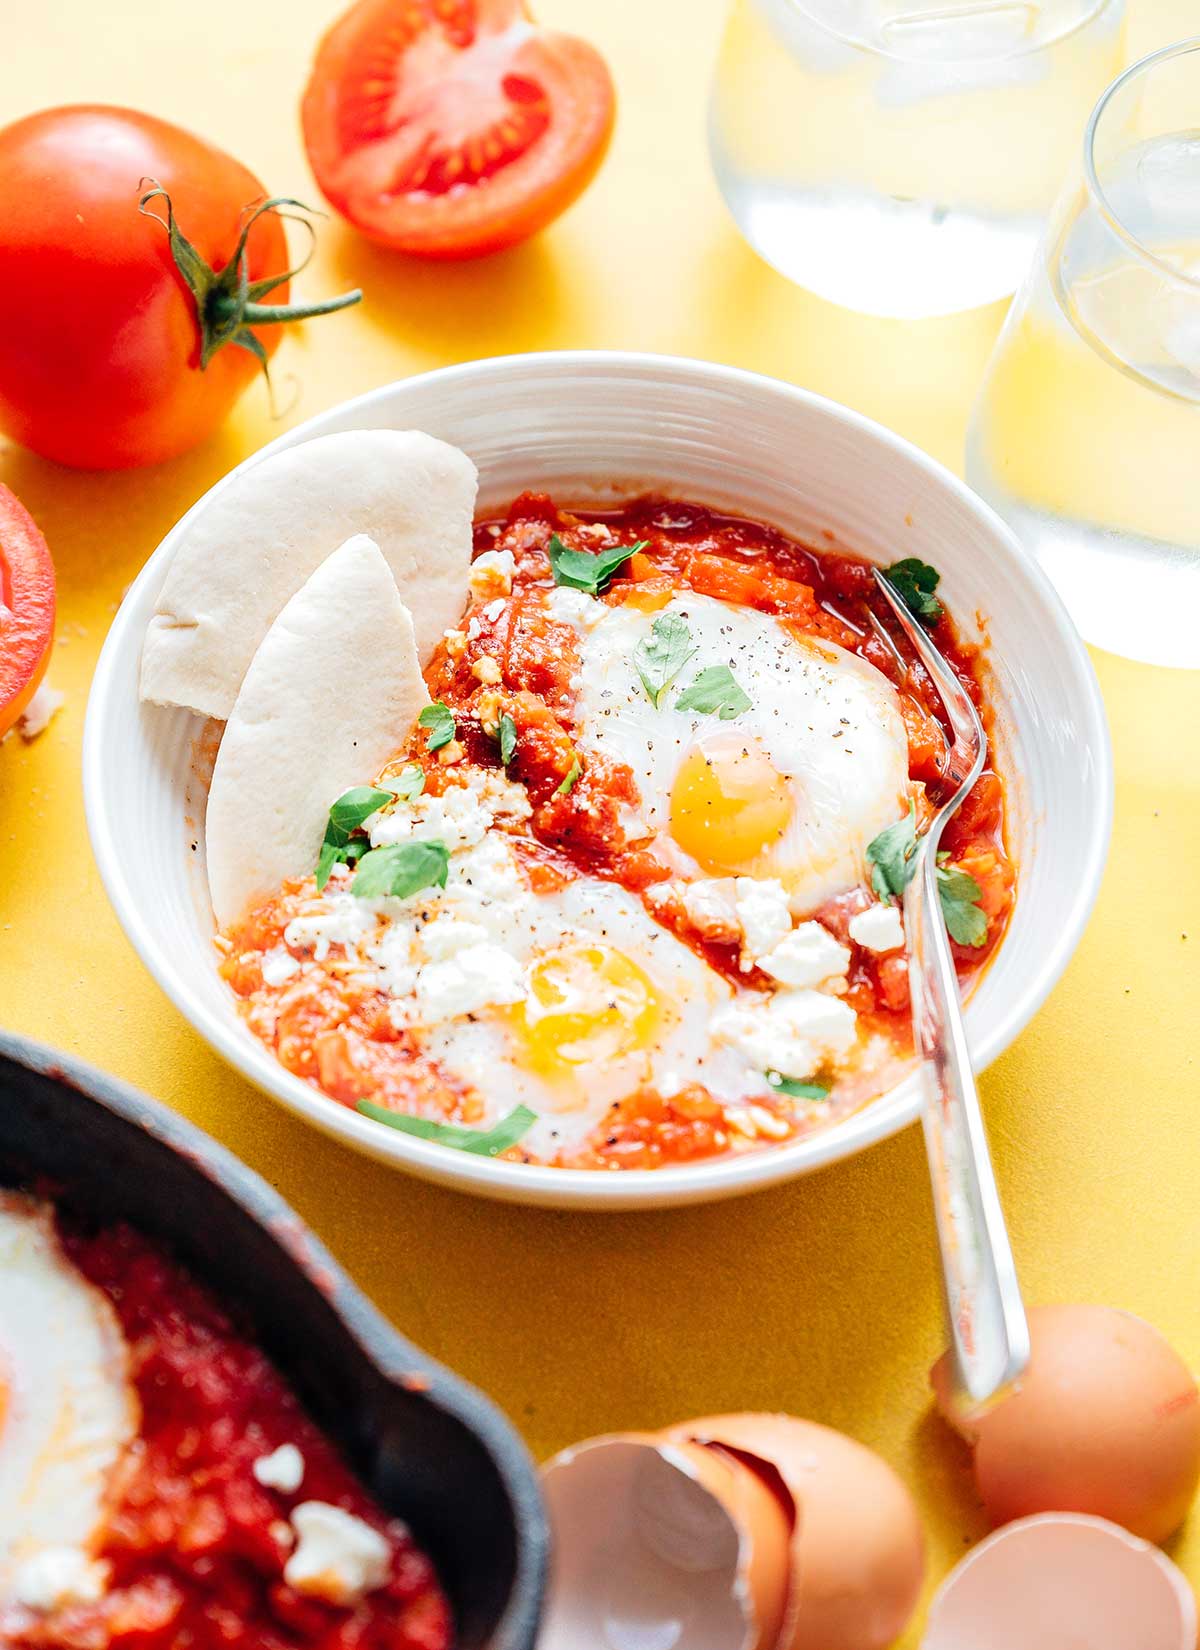 Shakshuka with eggs and pita break in a bowl on a yellow background